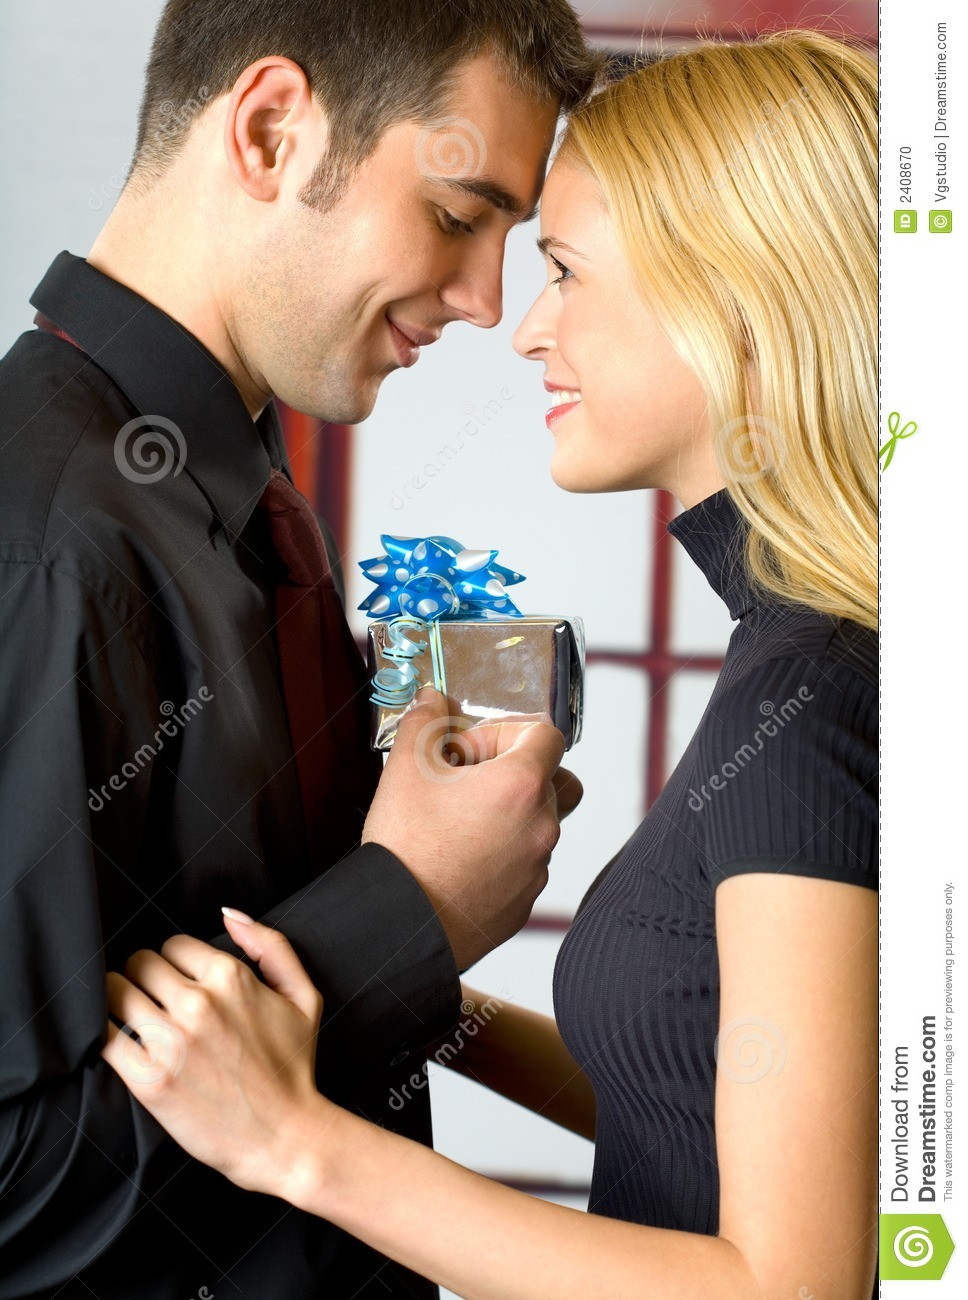 Gift Ideas For Young Couples
 Young Couple With Gifts Stock Image